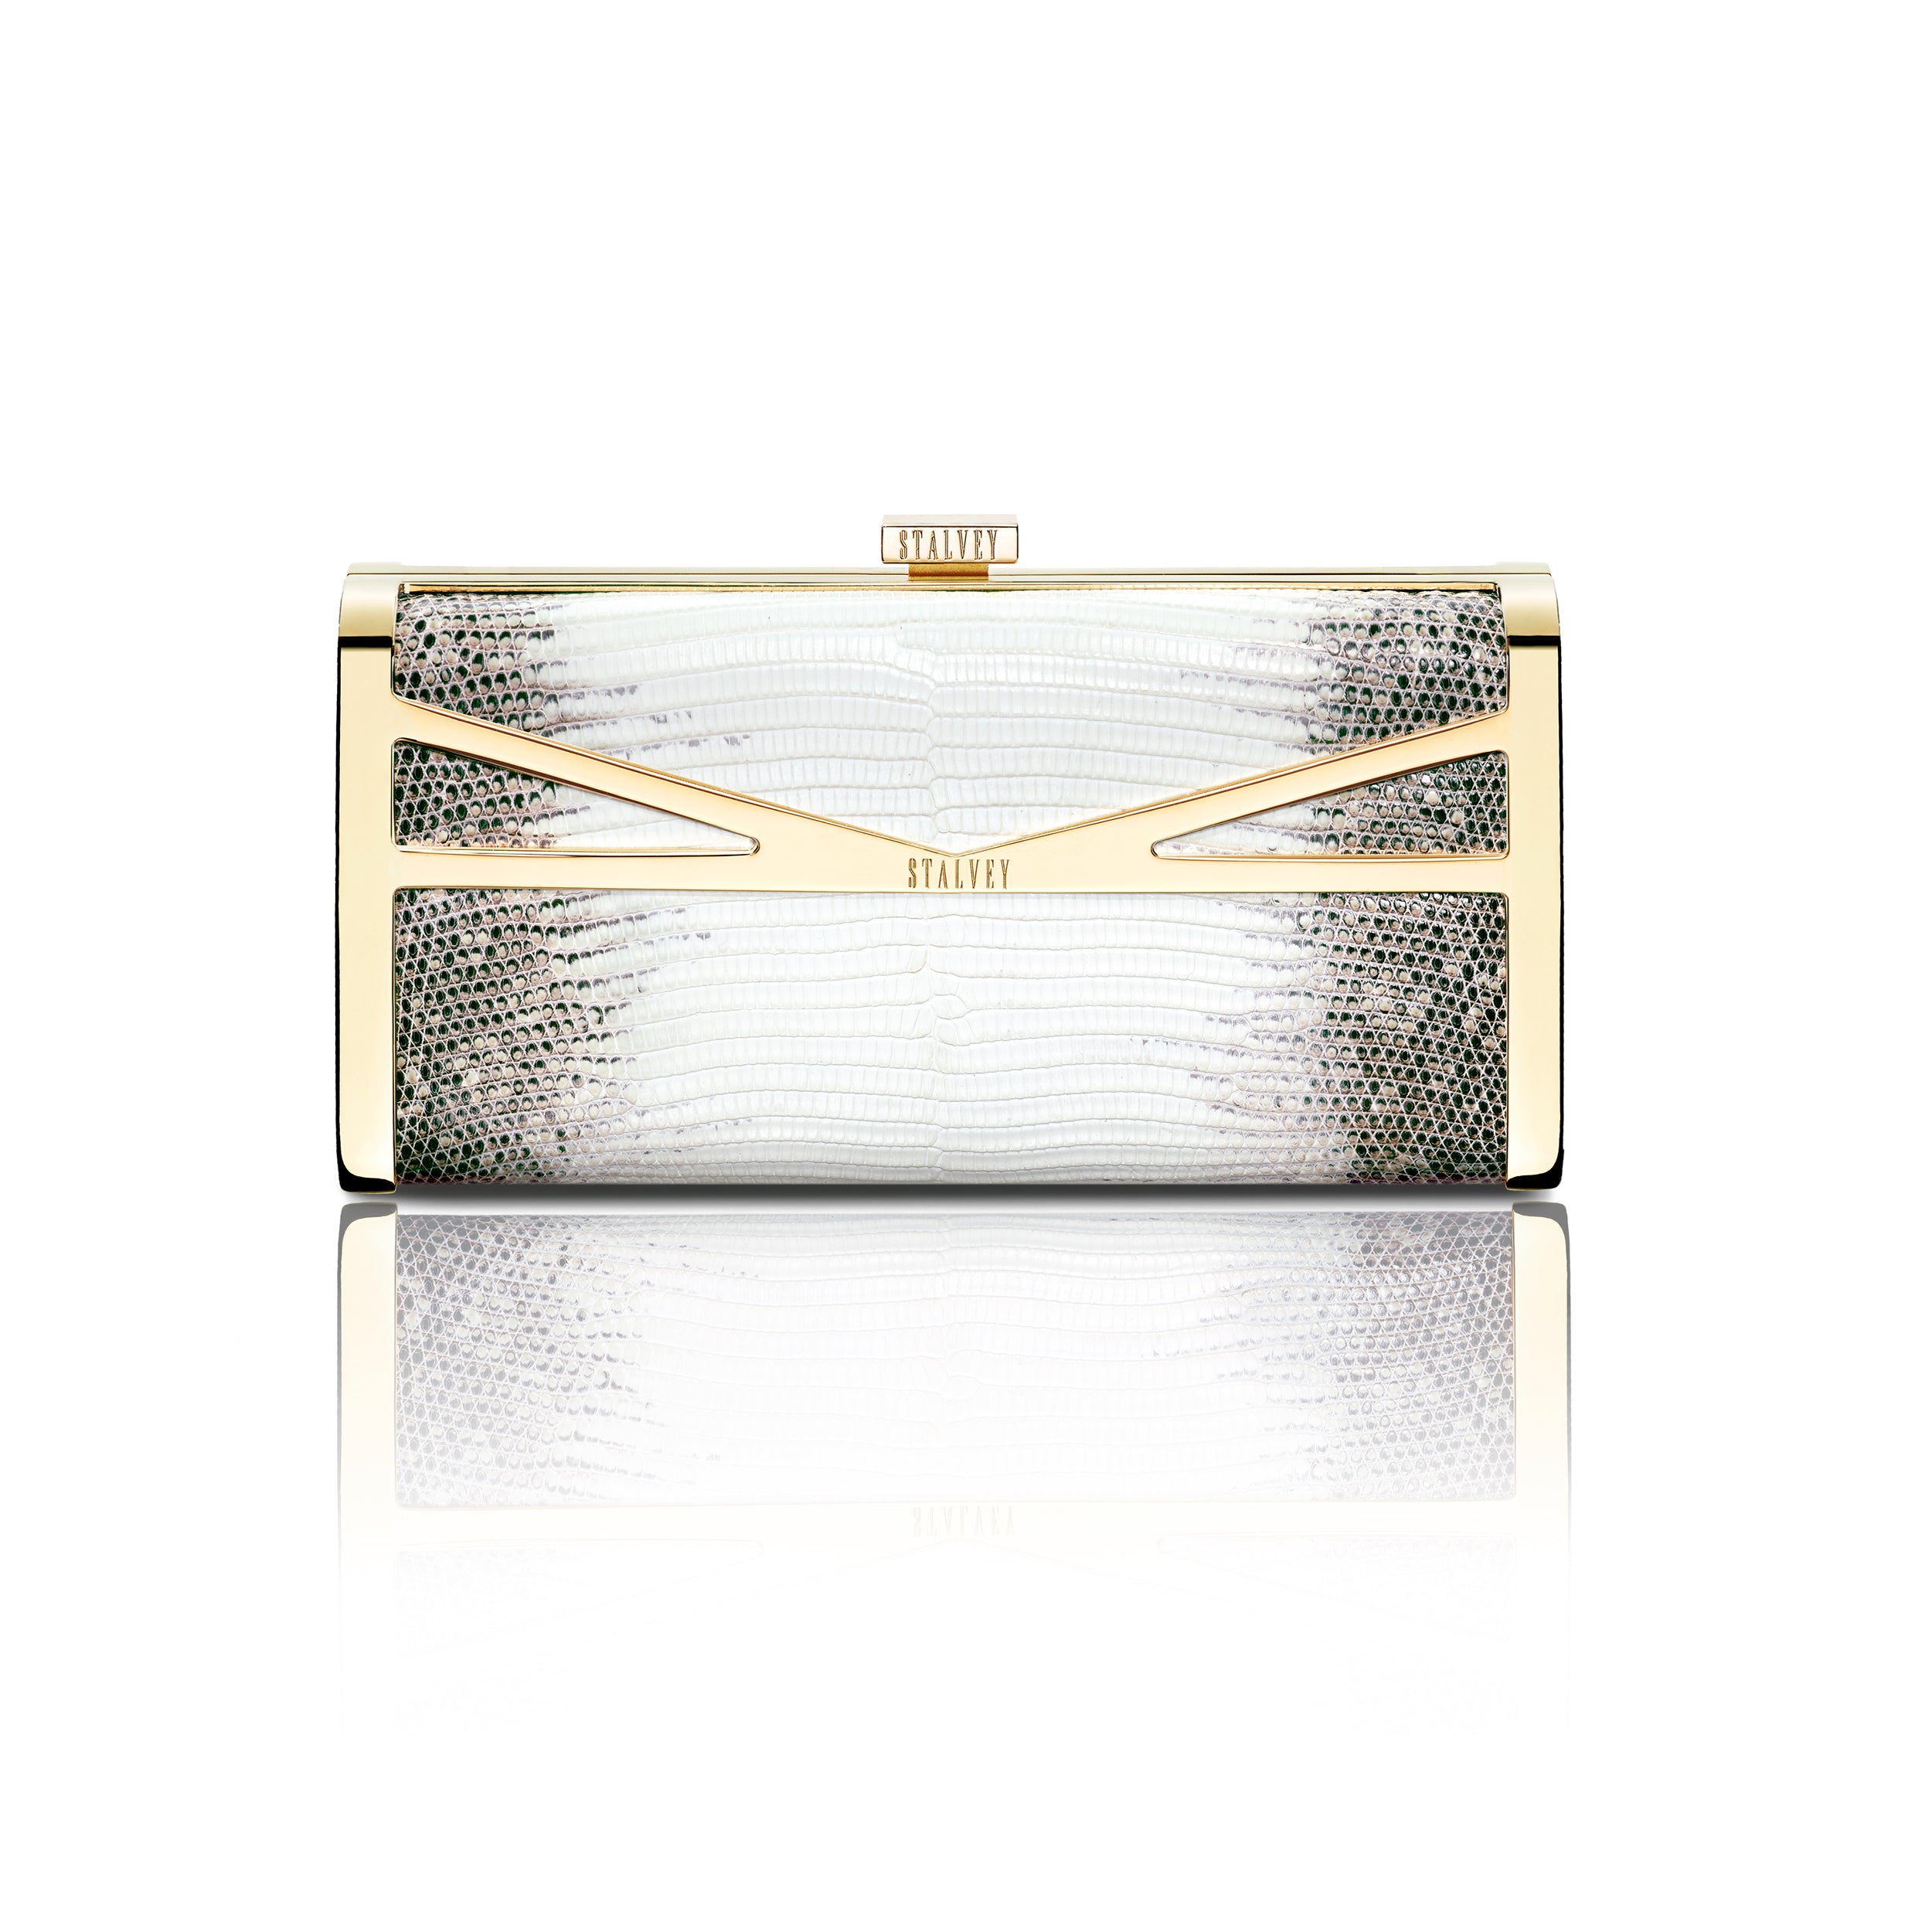 STALVEY Square Clutch in Natural Ring Lizard with 24kt Gold Hardware Front View